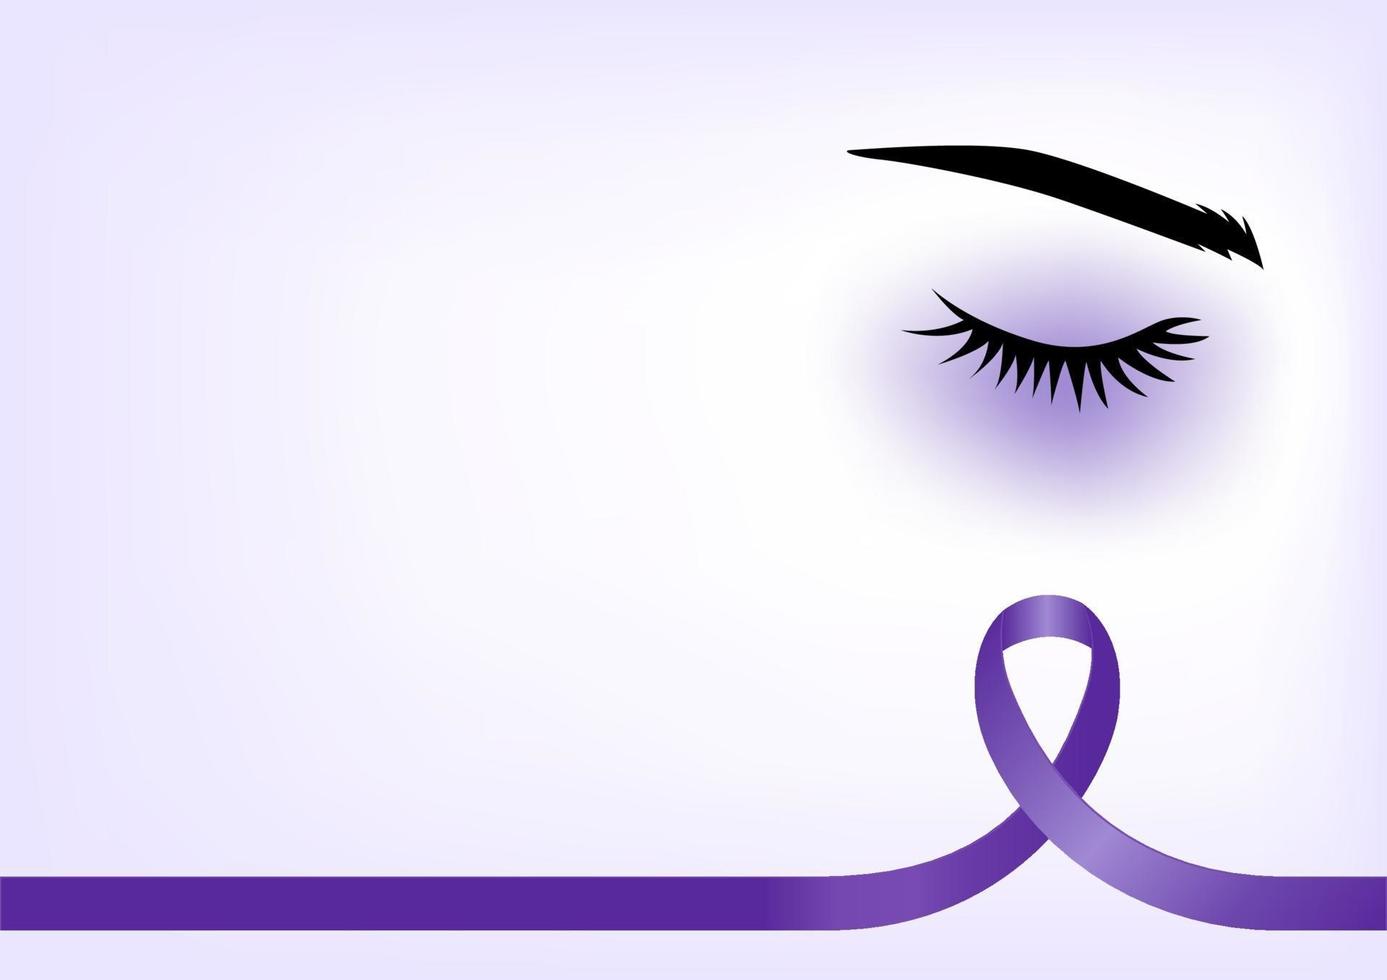 Awareness Ribbon Background With Eye vector